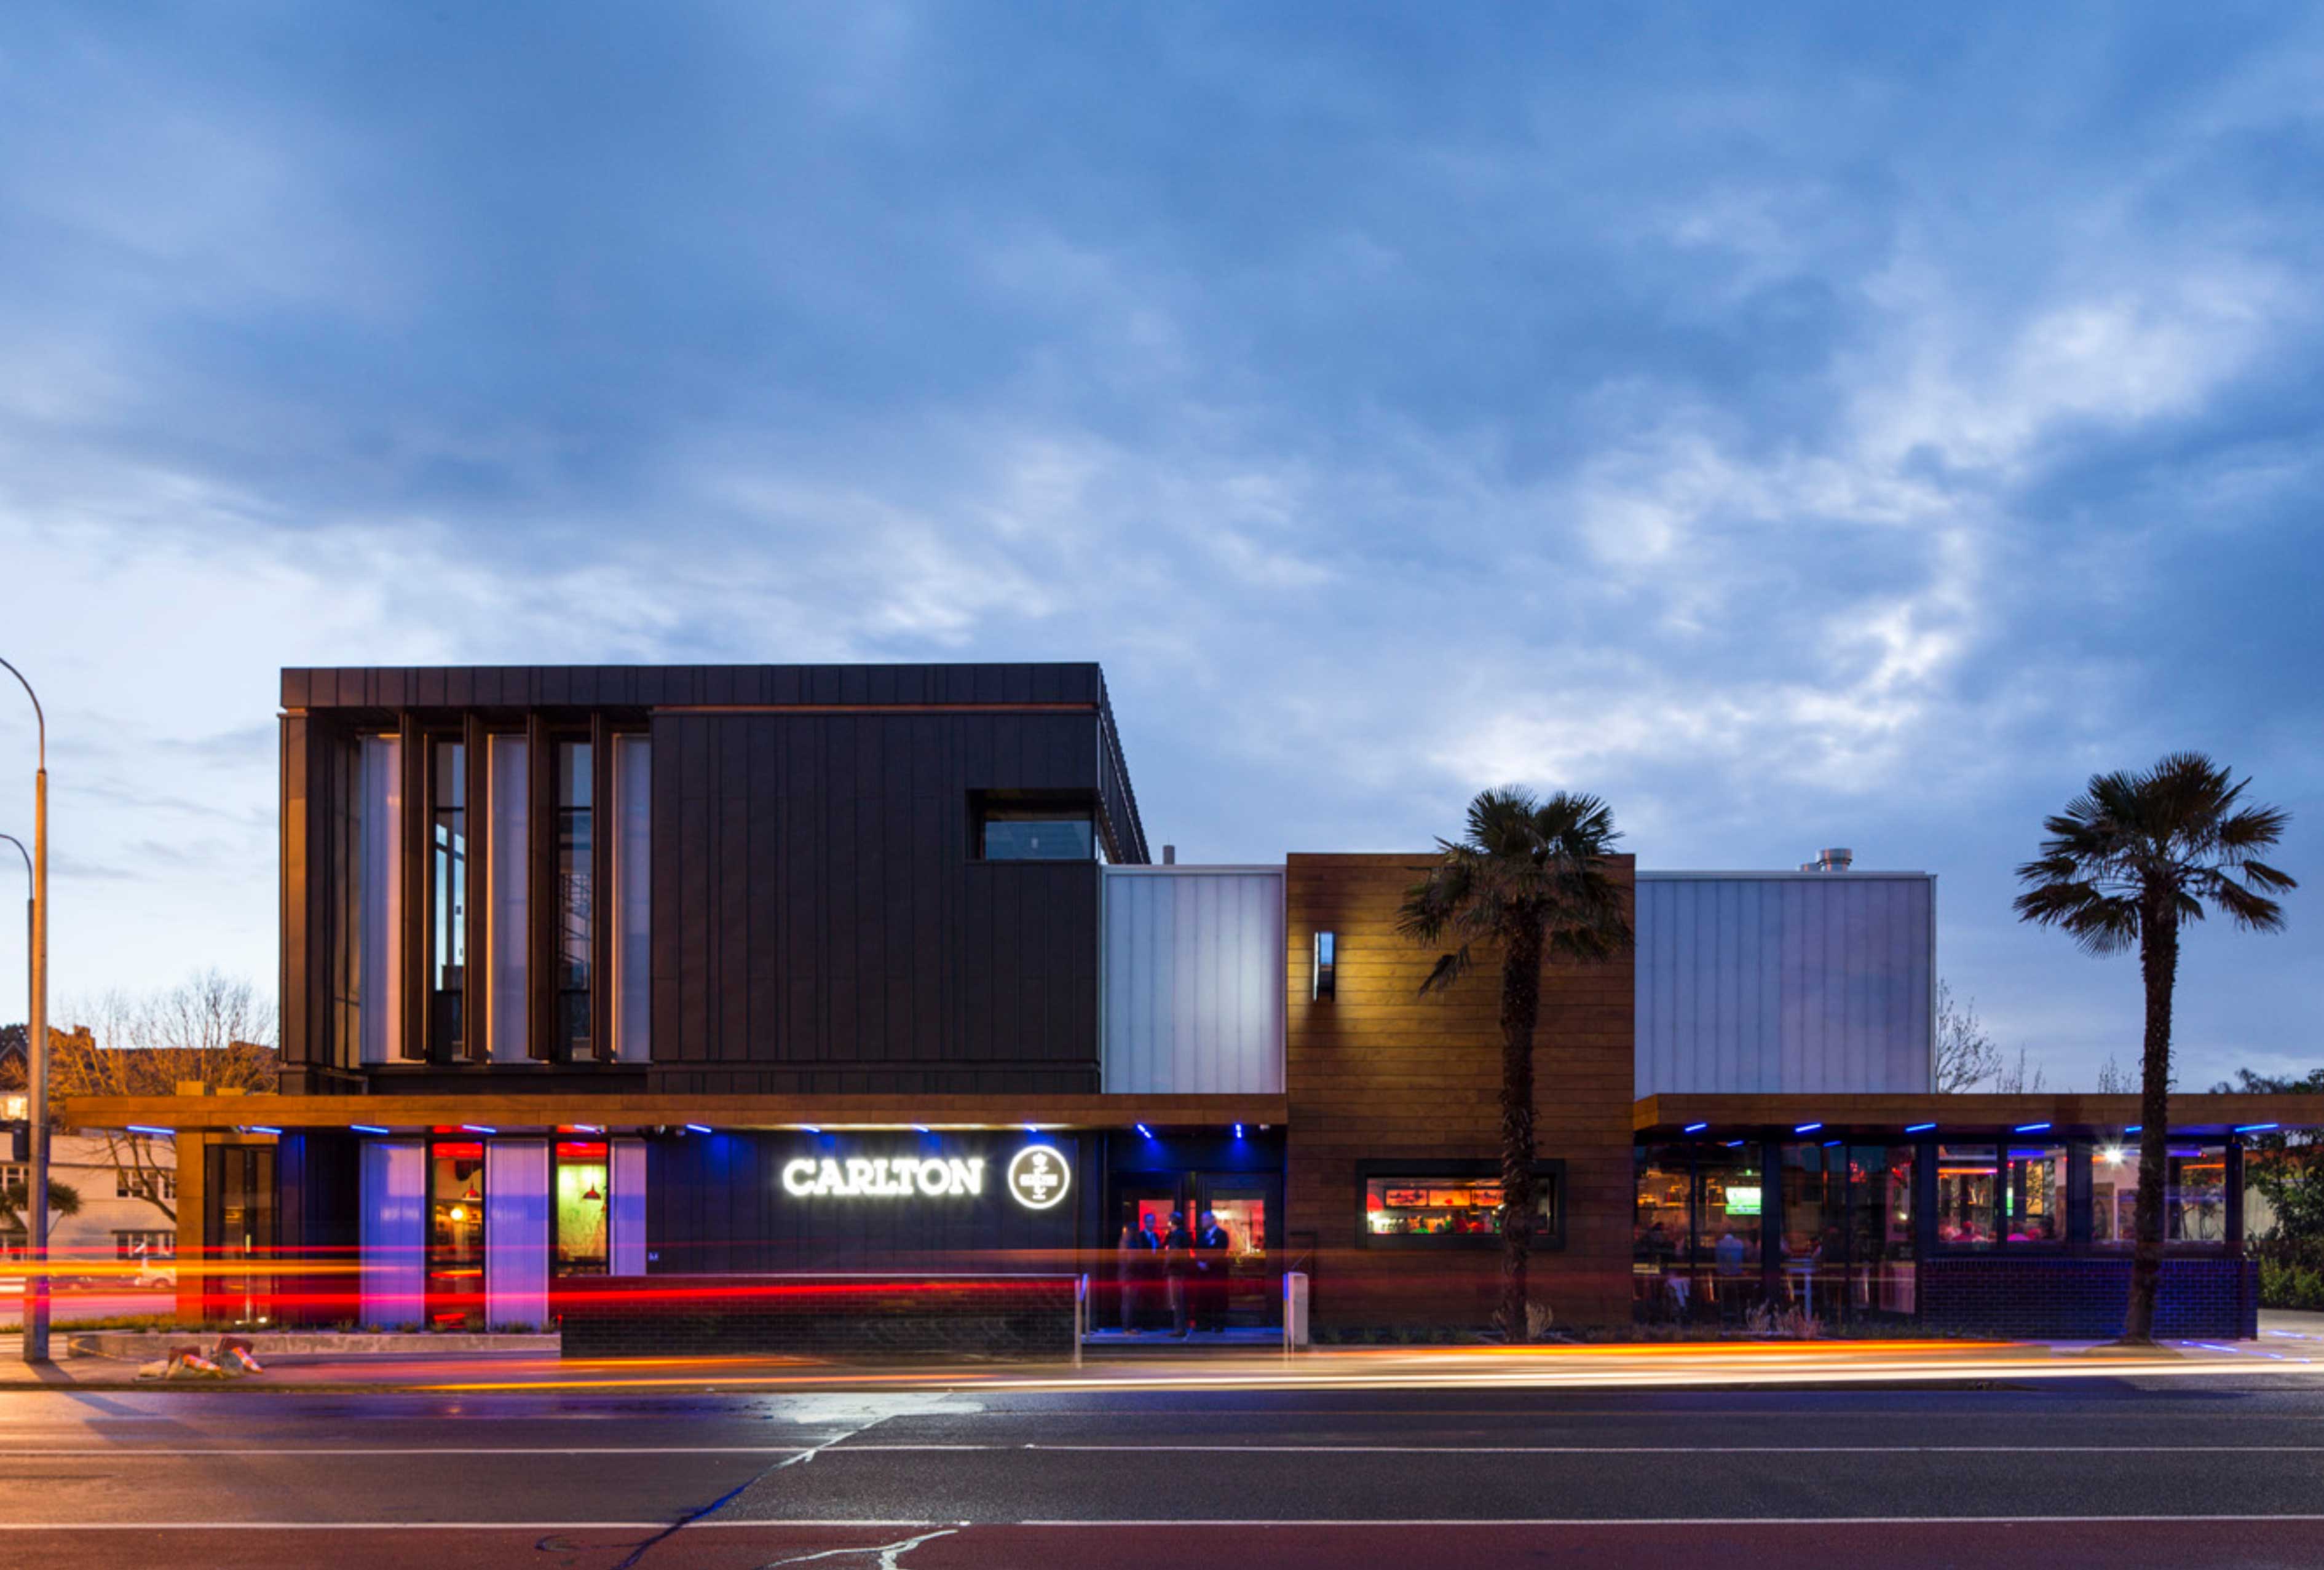 Wide view of Carlton Corner from the side at late-afternoon with prominent Carlton branding